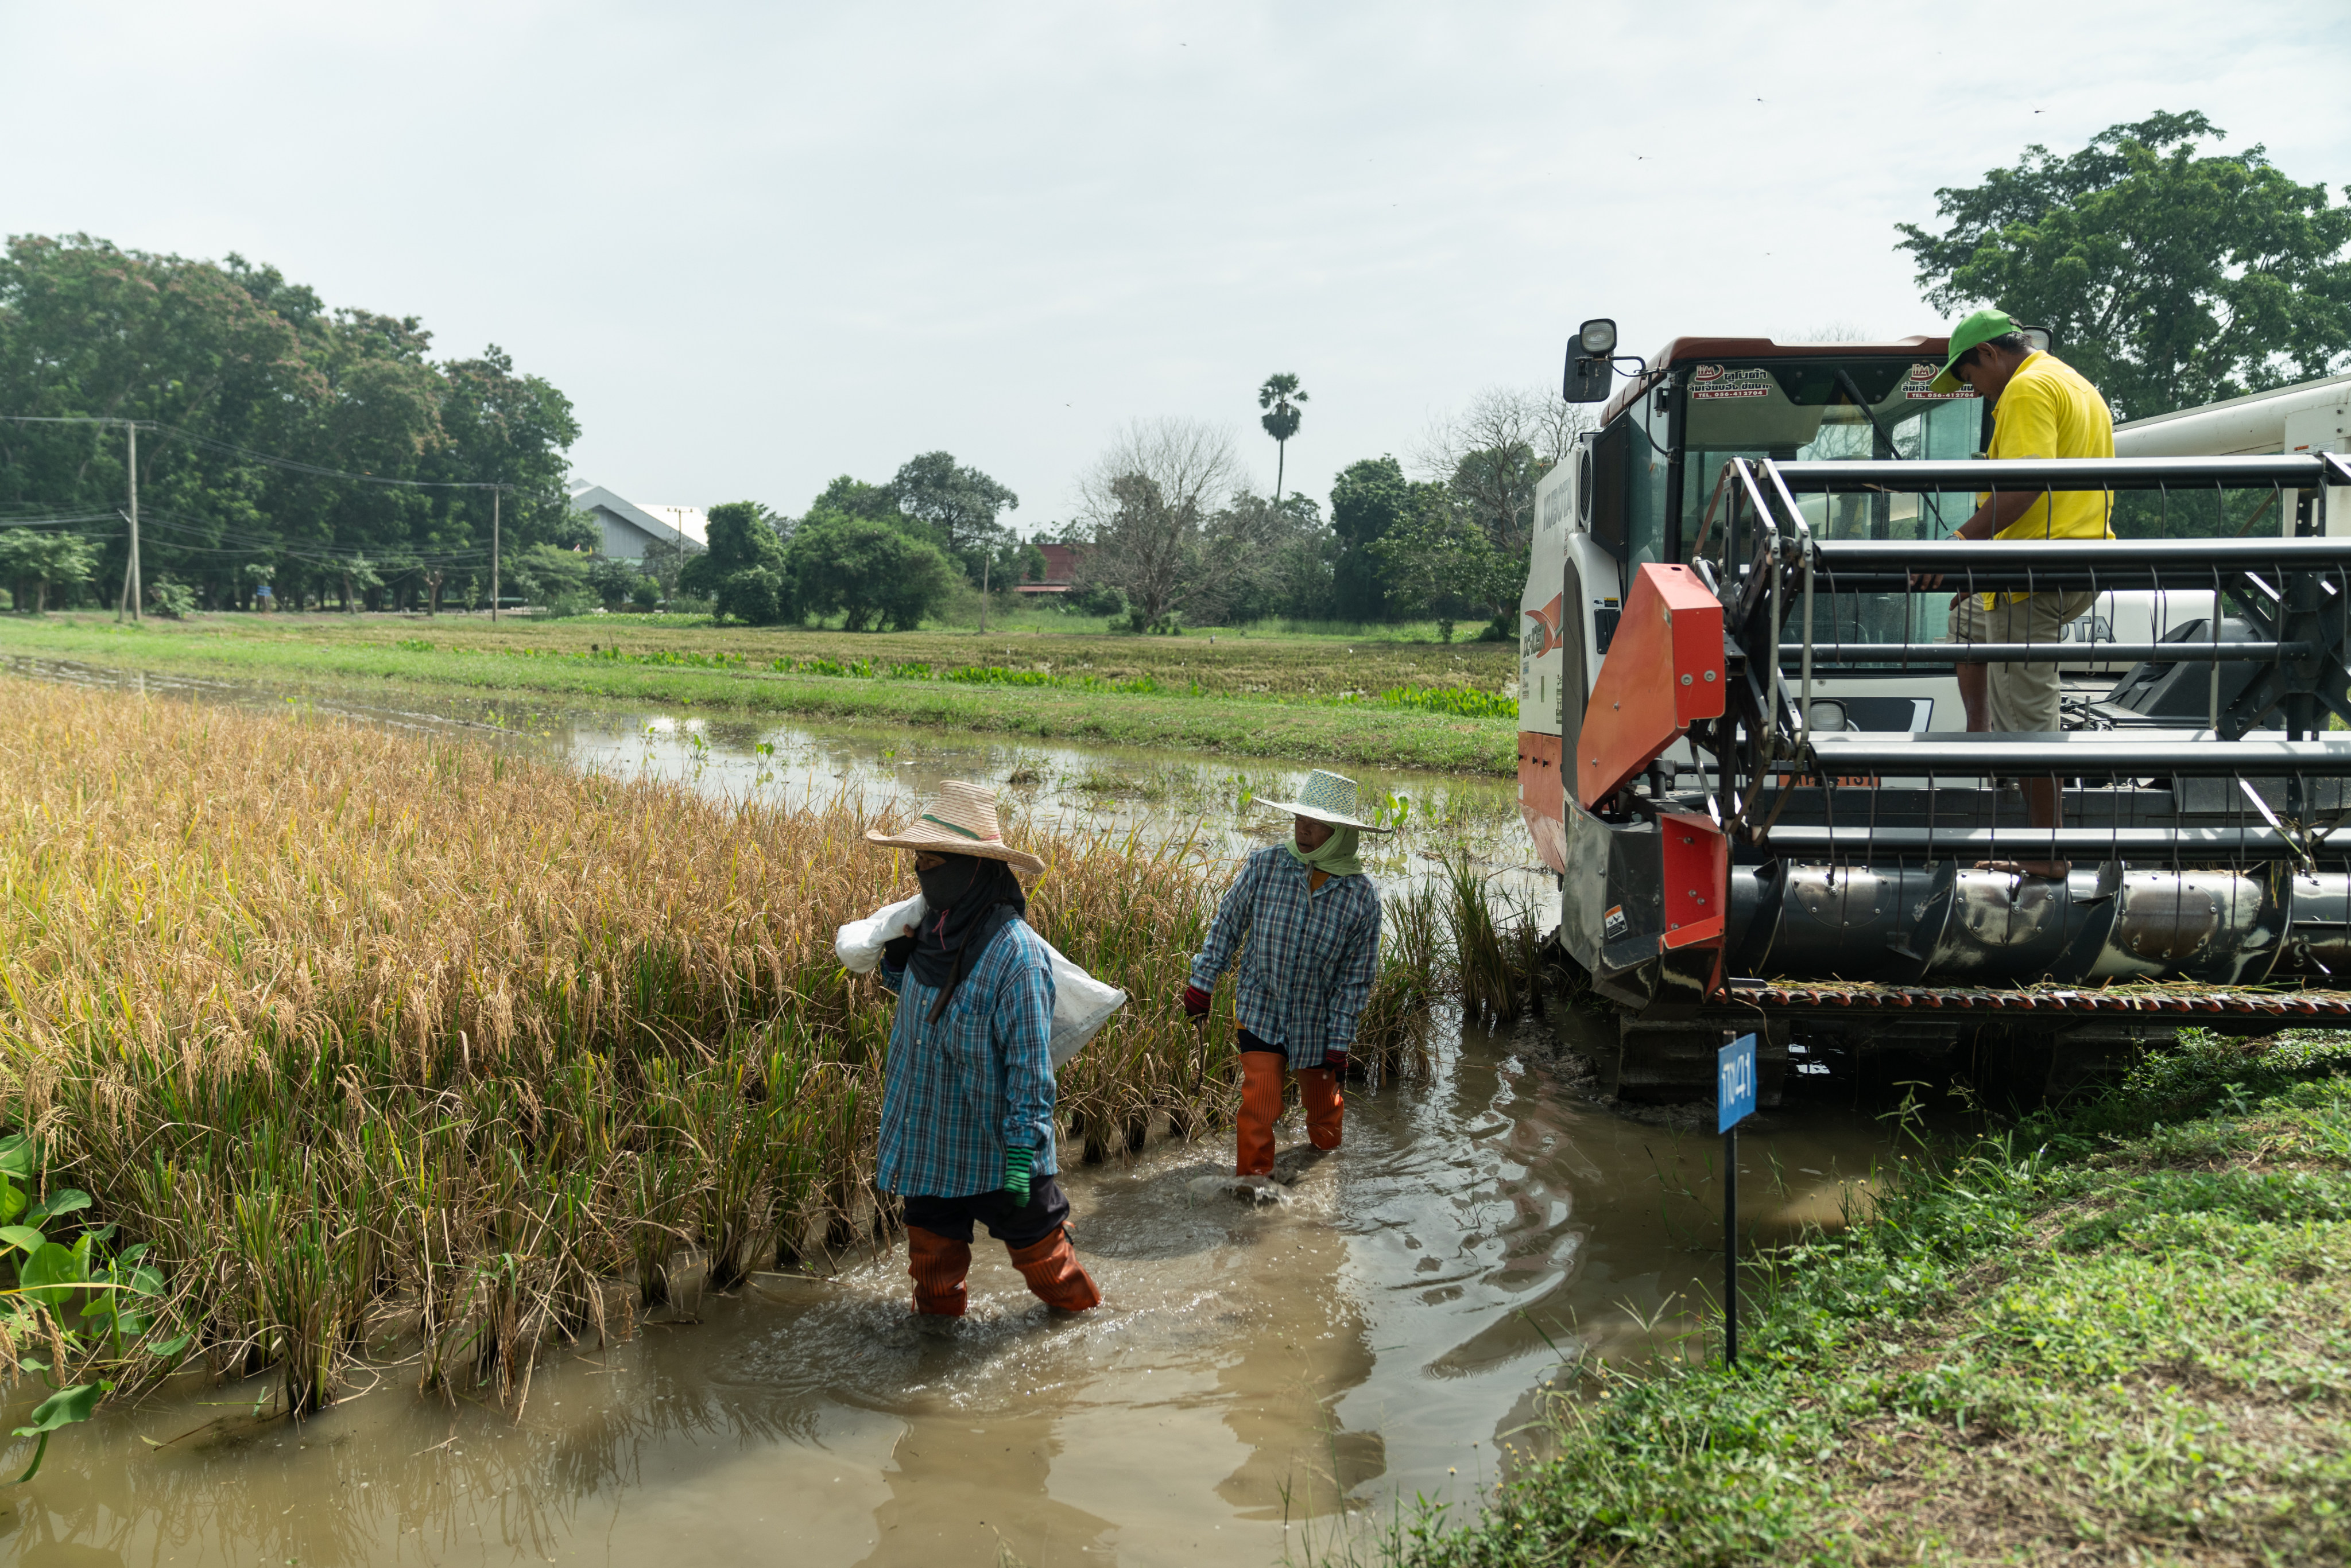 Workers harvest rice in a pilot field at the Chai Nat Rice Research Centre in Khao Tha Phra, Chai Nat, Thailand, on October 26, 2020. Photo: Bloomberg